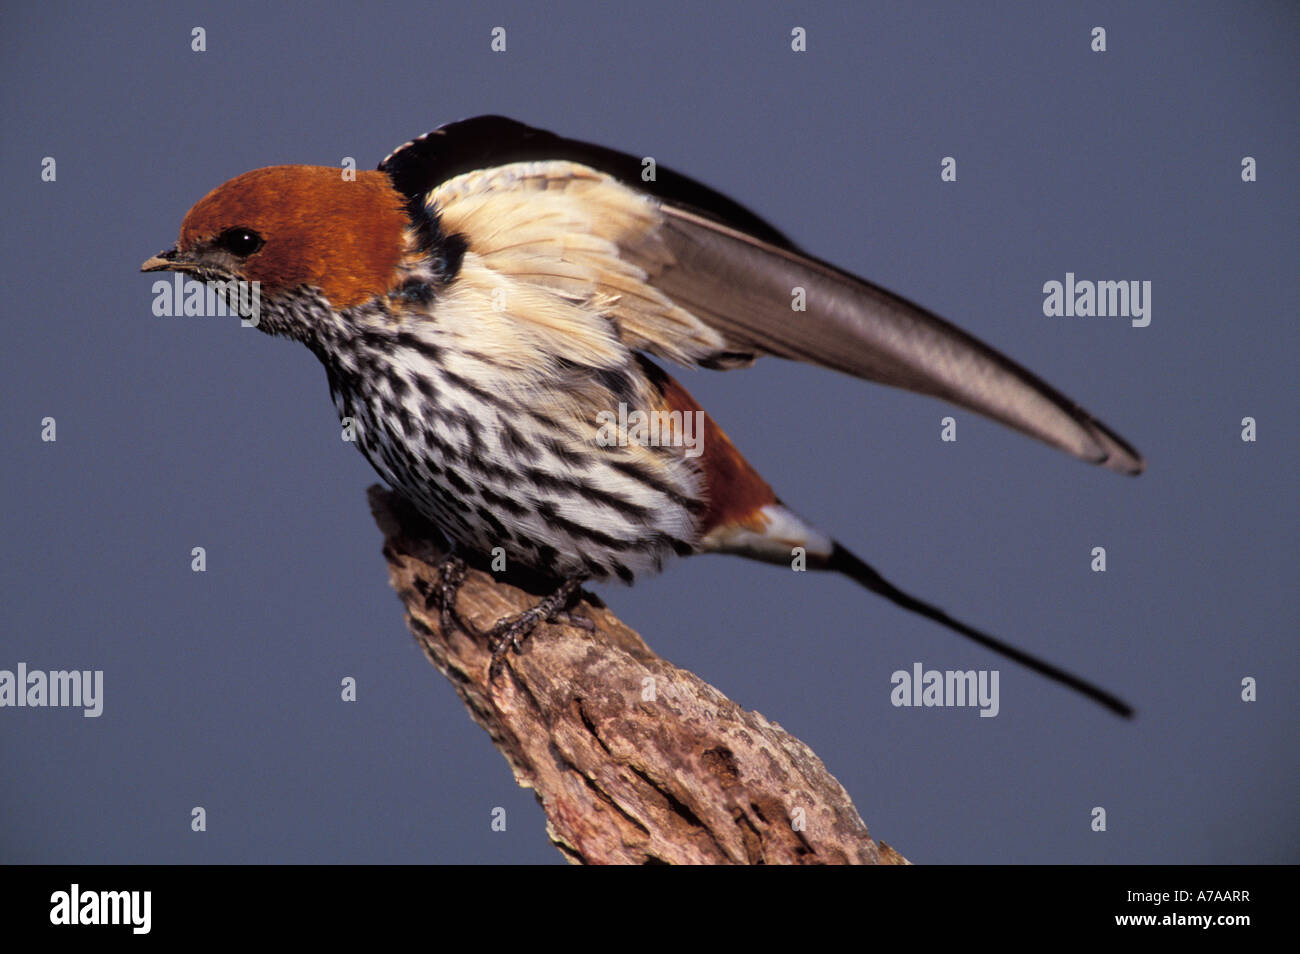 Lesser striped swallow stretching its wings South Africa Stock Photo